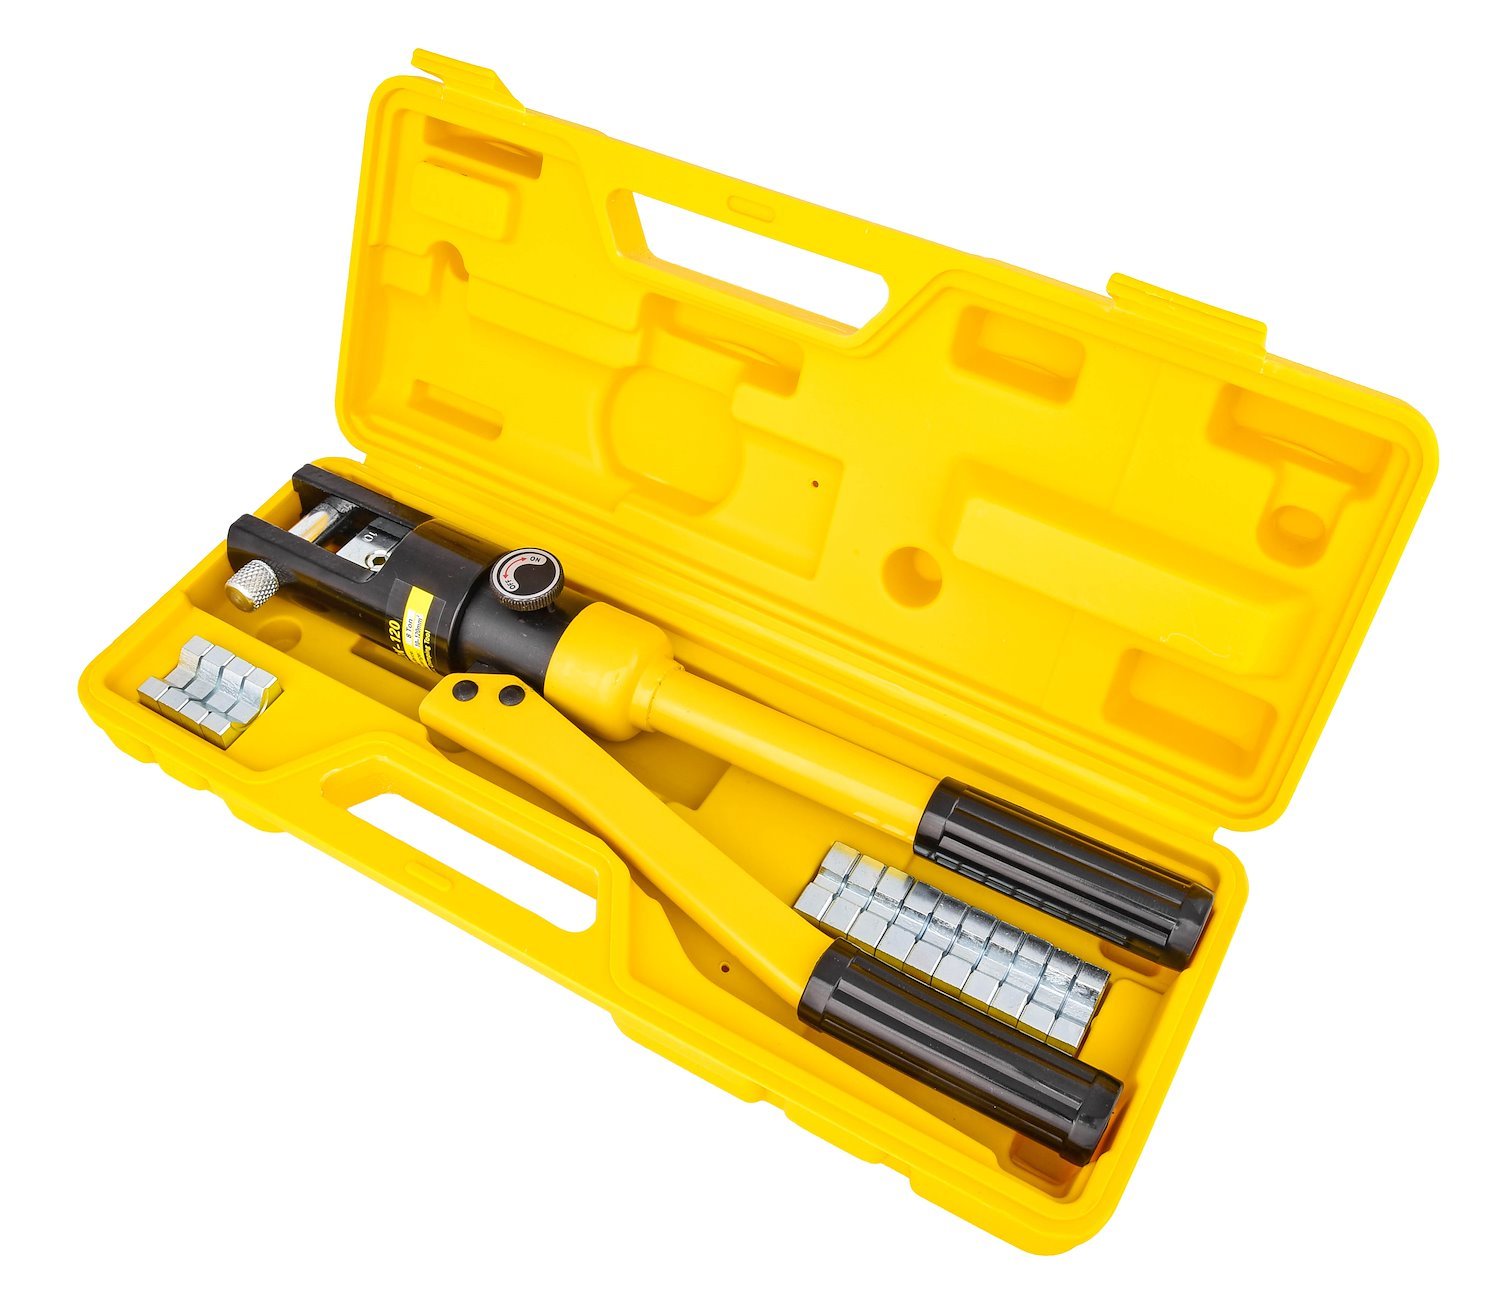 JEGS 555-81791: 8-Ton Hydraulic Wire Cable Lug Terminal Crimping Tool |  Crimps 10 to 120 mm Lugs | Black Vinyl Grip Handles | Powder Coated Finish  | Includes 10, 16, 25, 35, 50, 70, 95, 120 mm Dies - JEGS